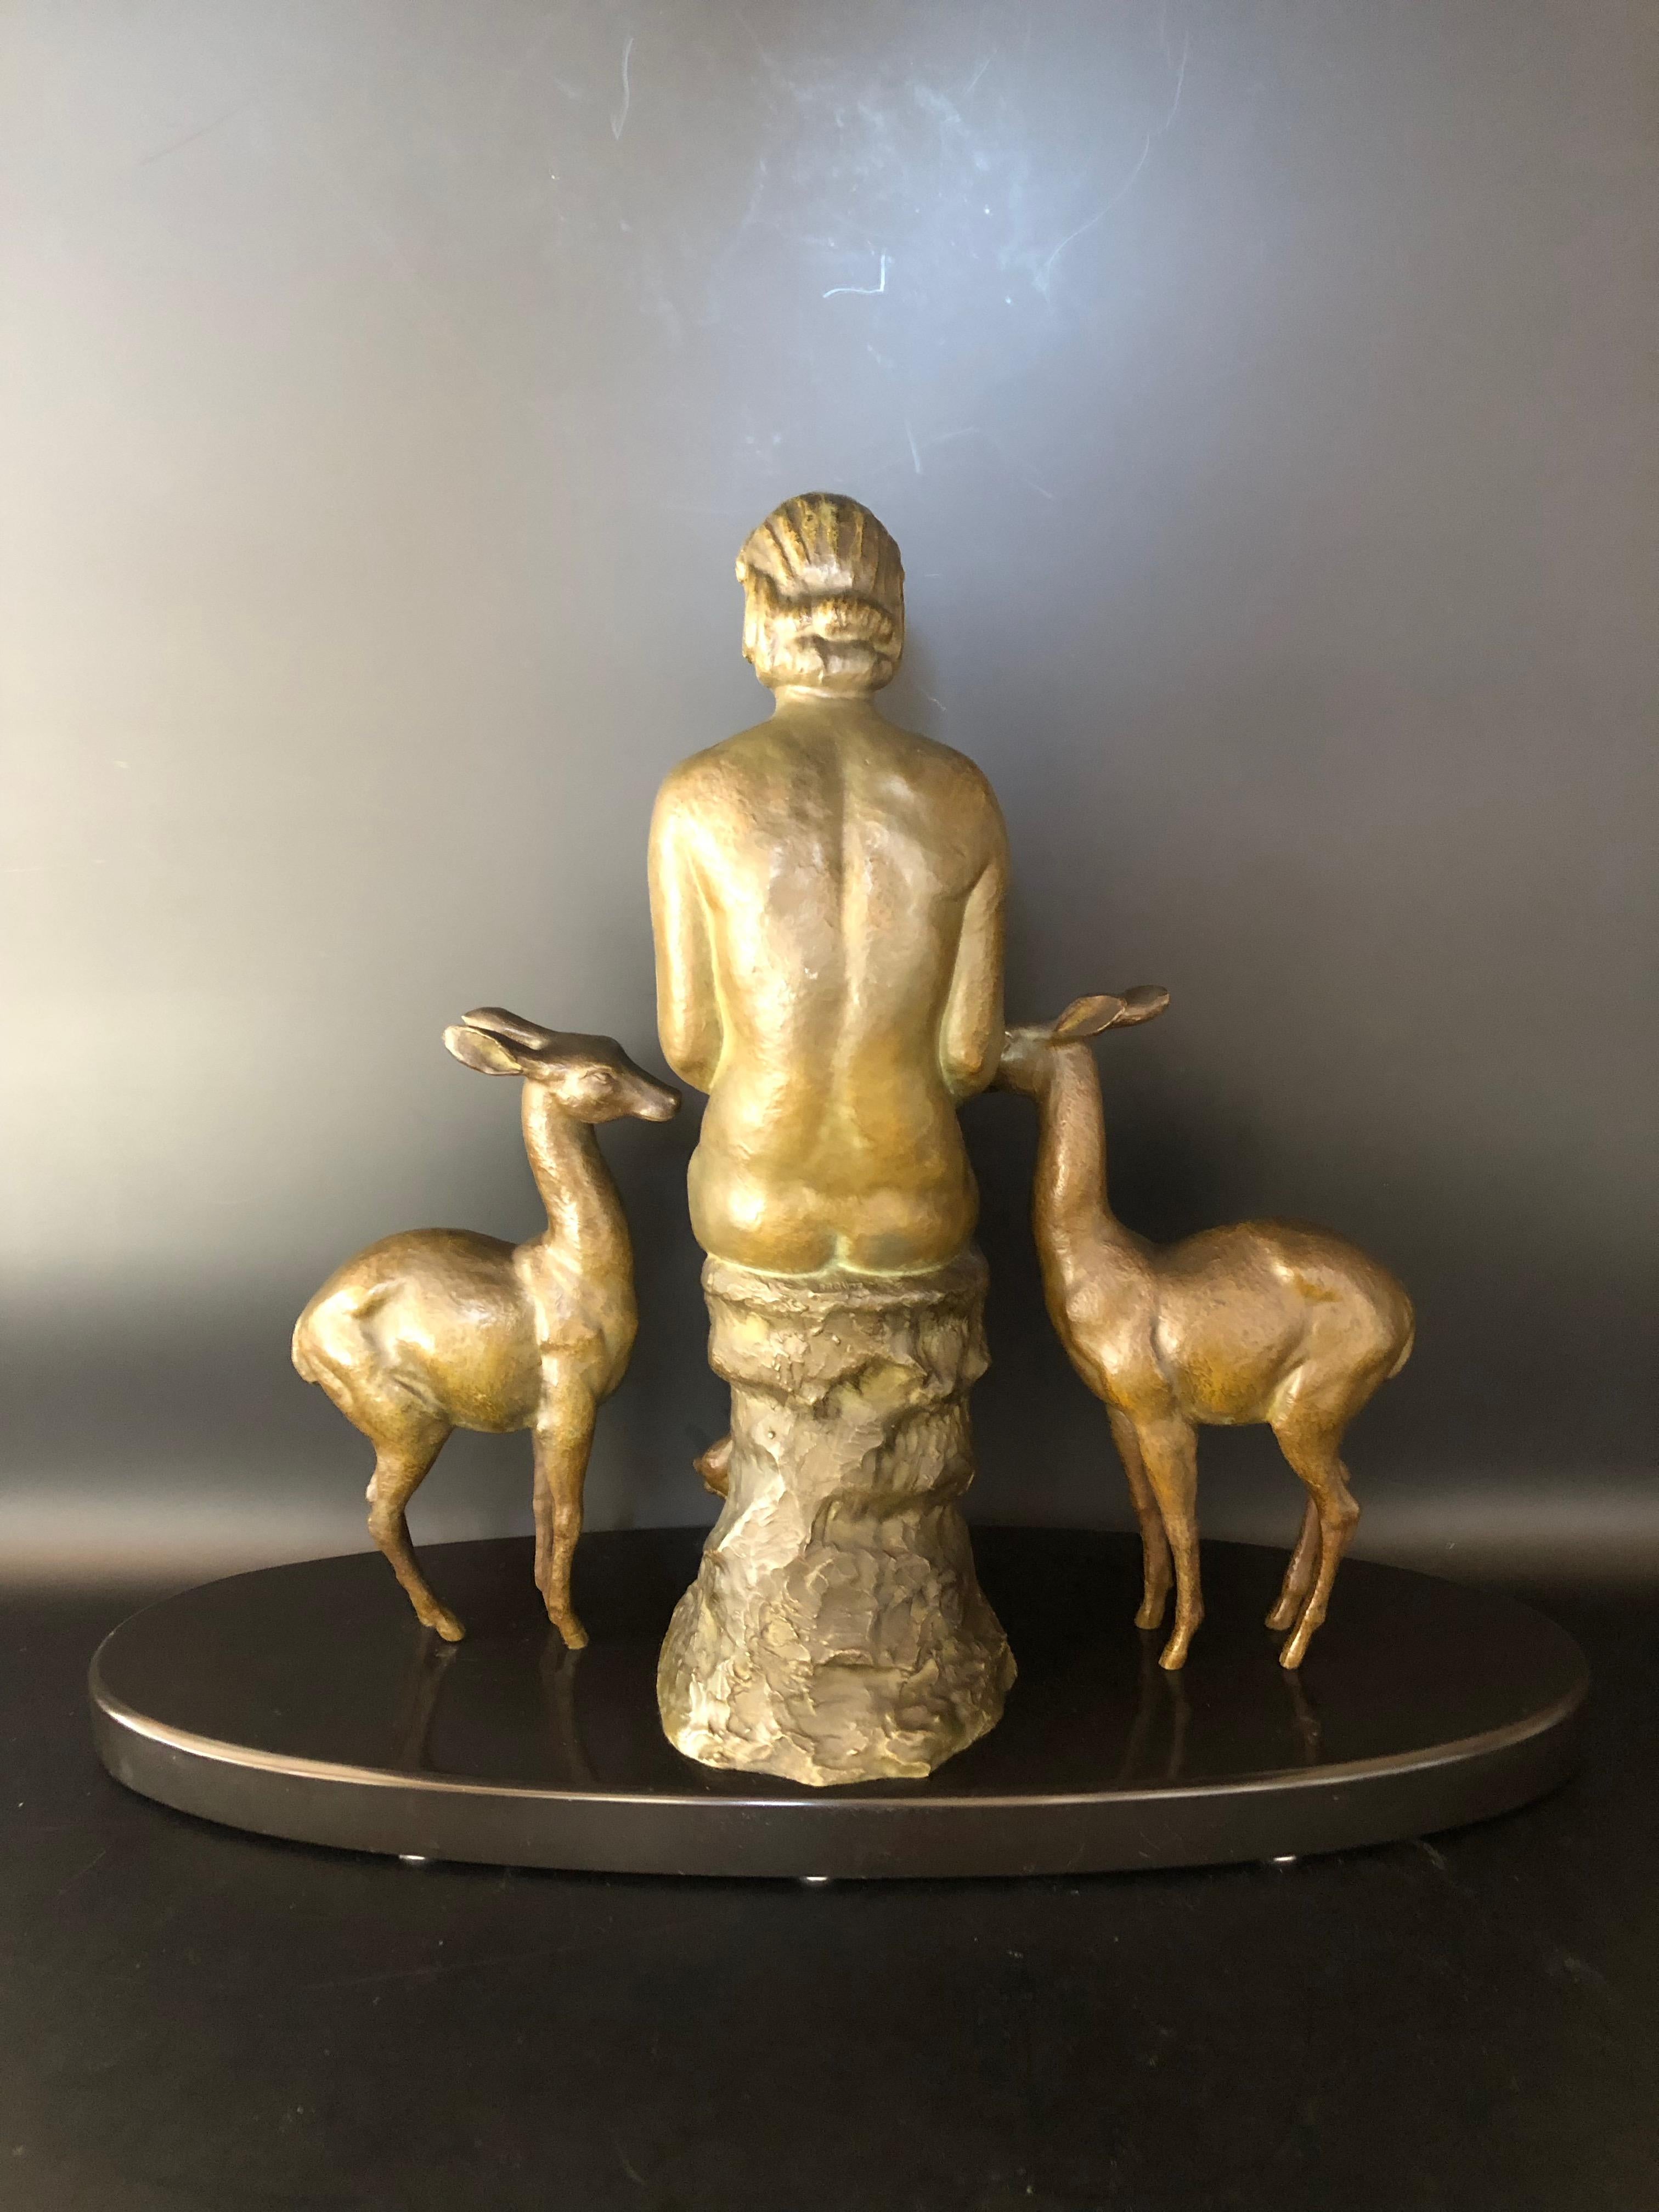 20th Century Art Deco Bronze “Offering” Signed Cipriani For Sale